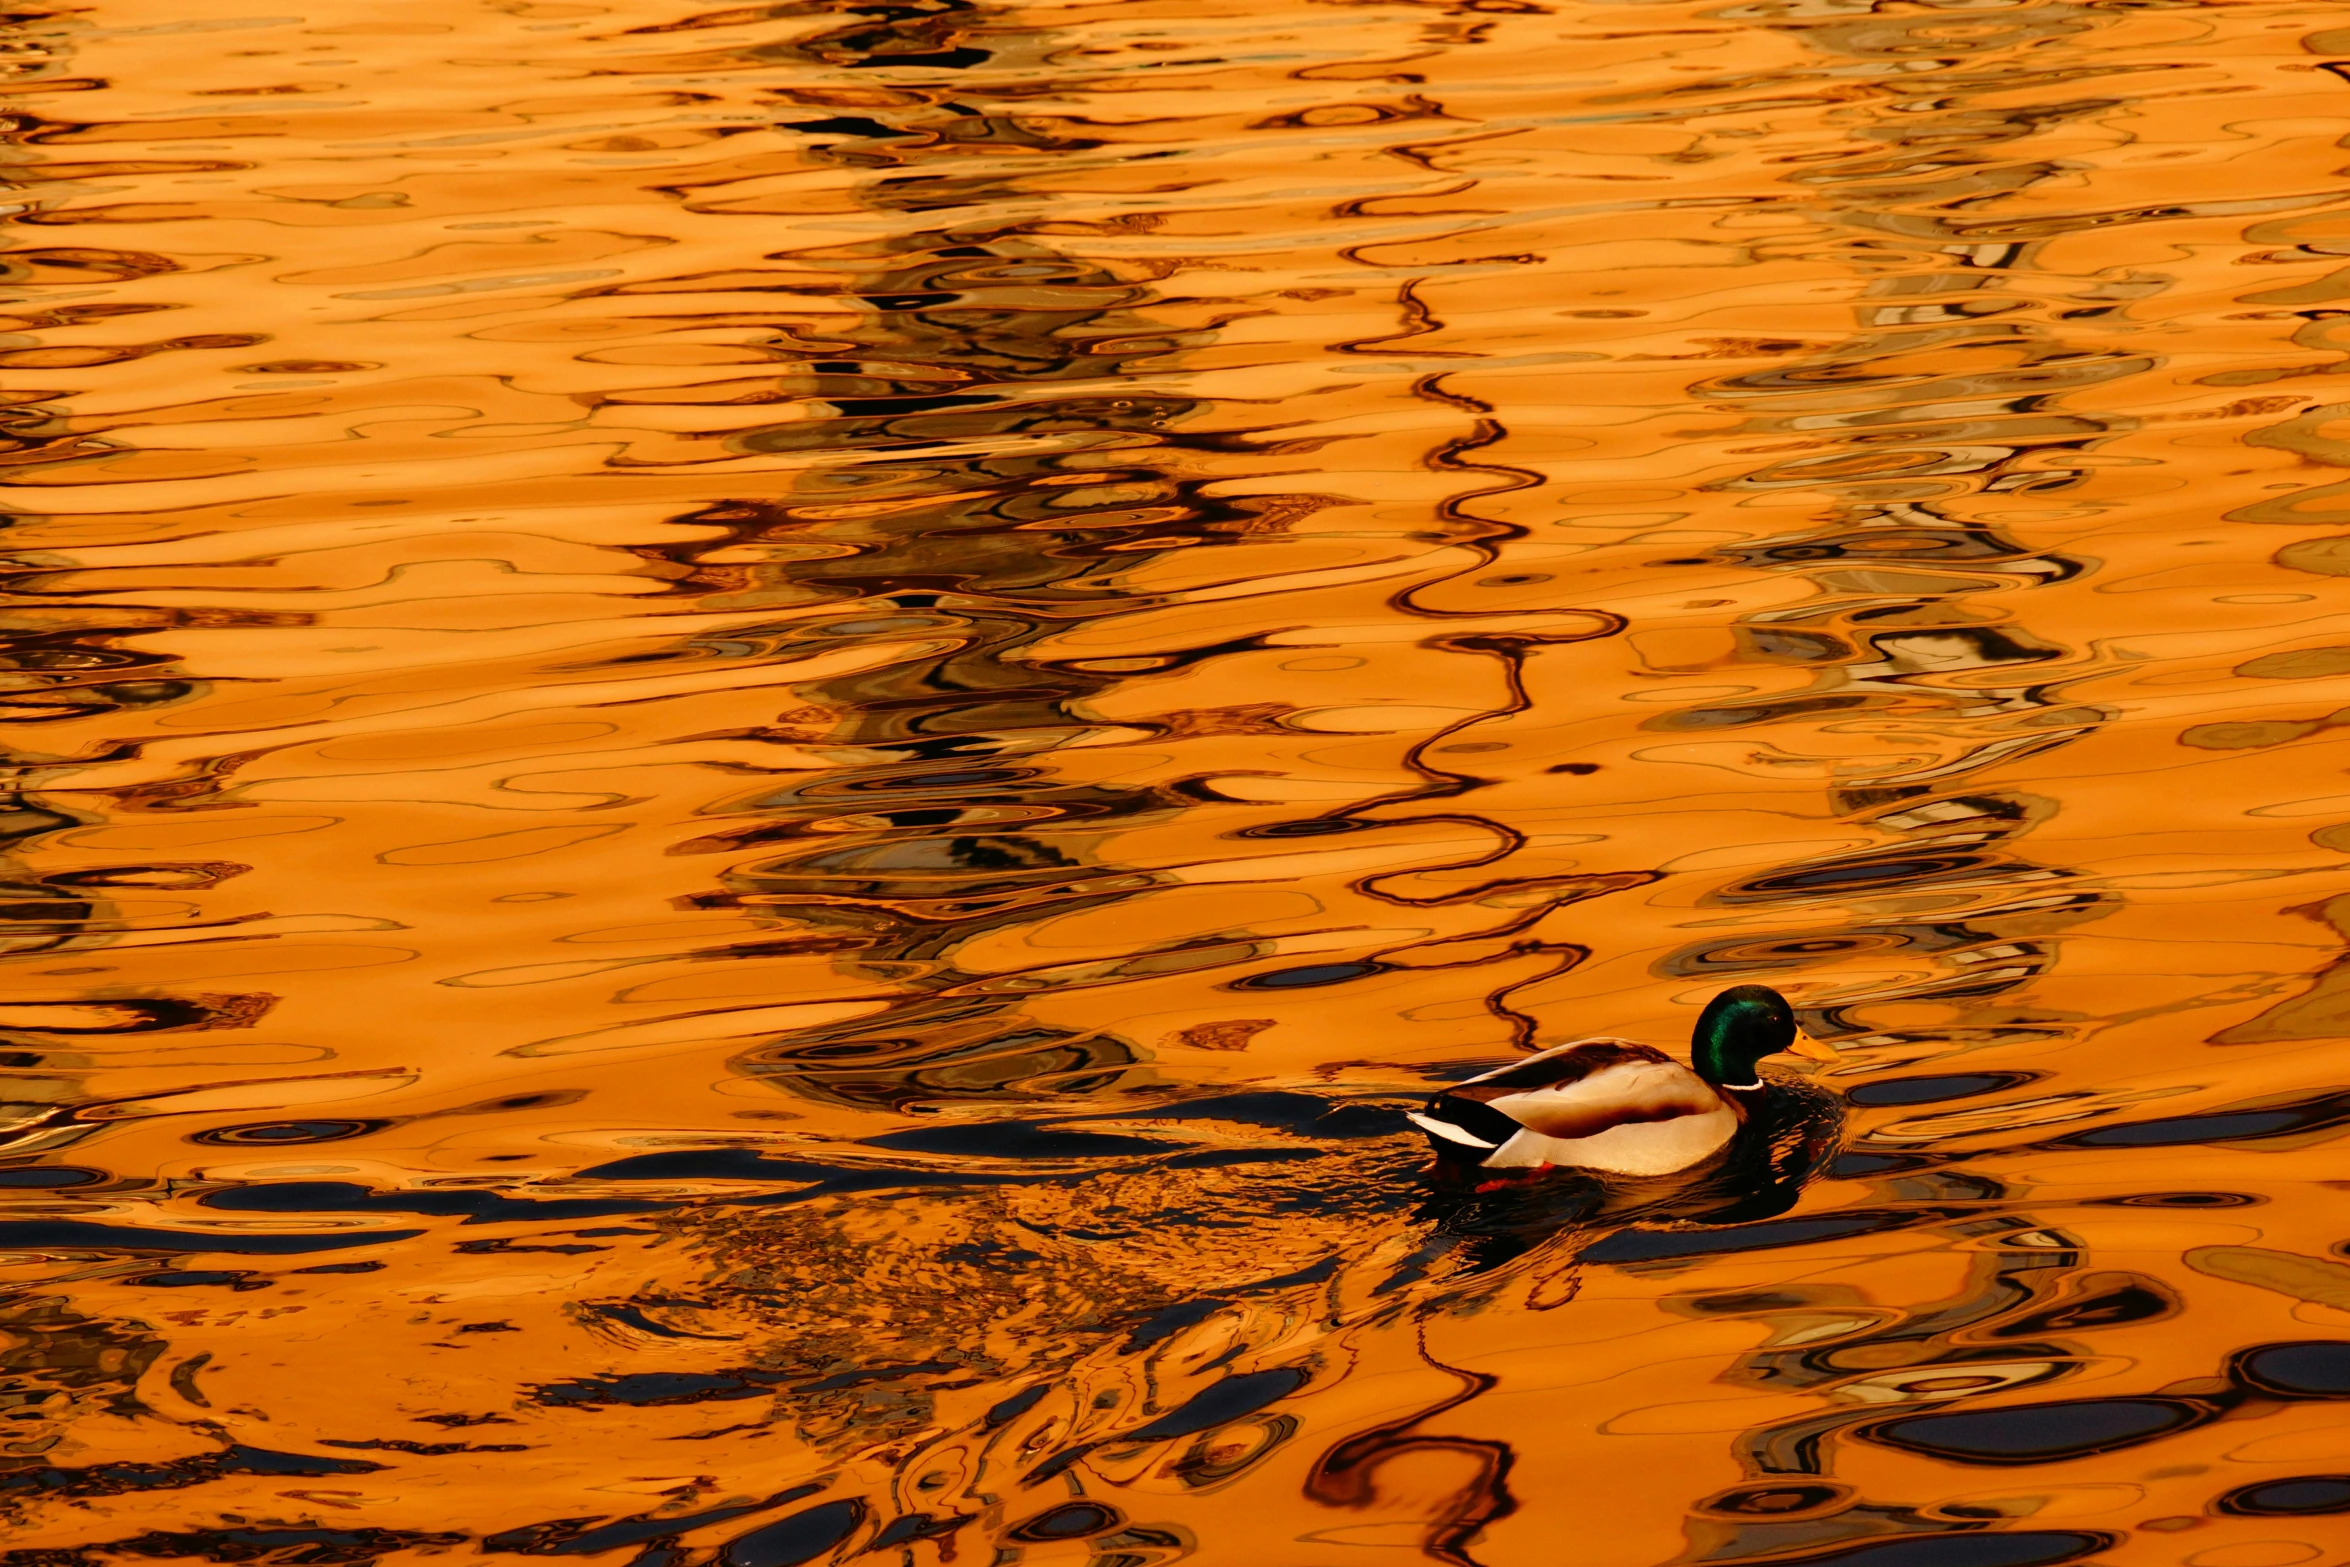 a duck in the middle of a large body of water